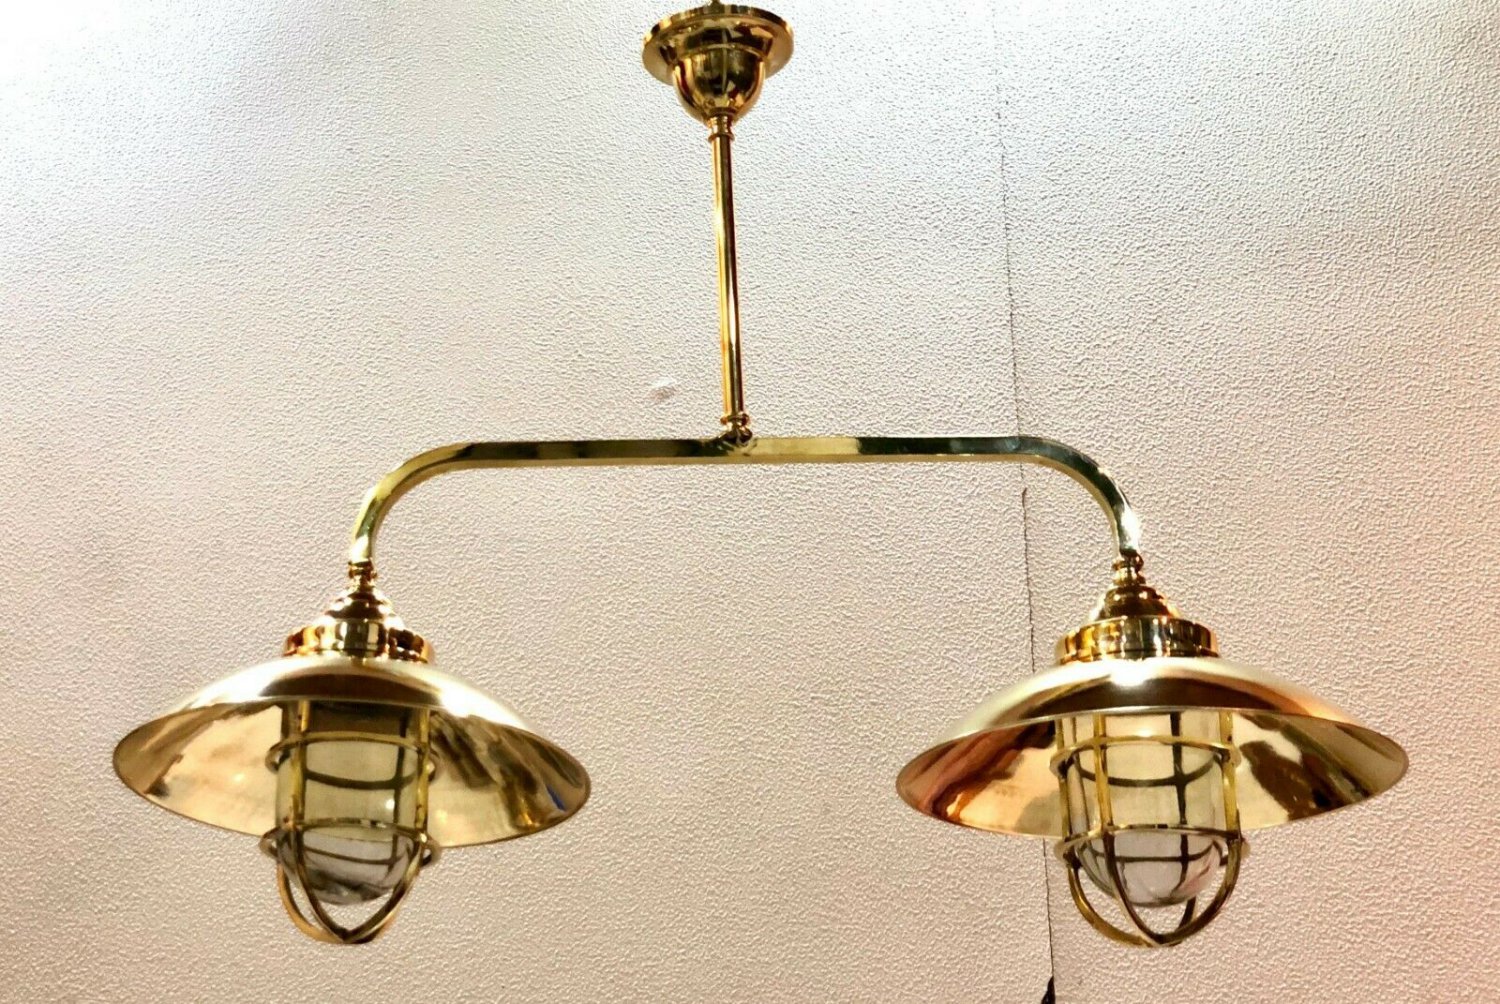  NAUTICAL SHIP MARINE NEW BRASS HANGING CARGO TWIN PENDANT LIGHT WITH SHADES LOT 10